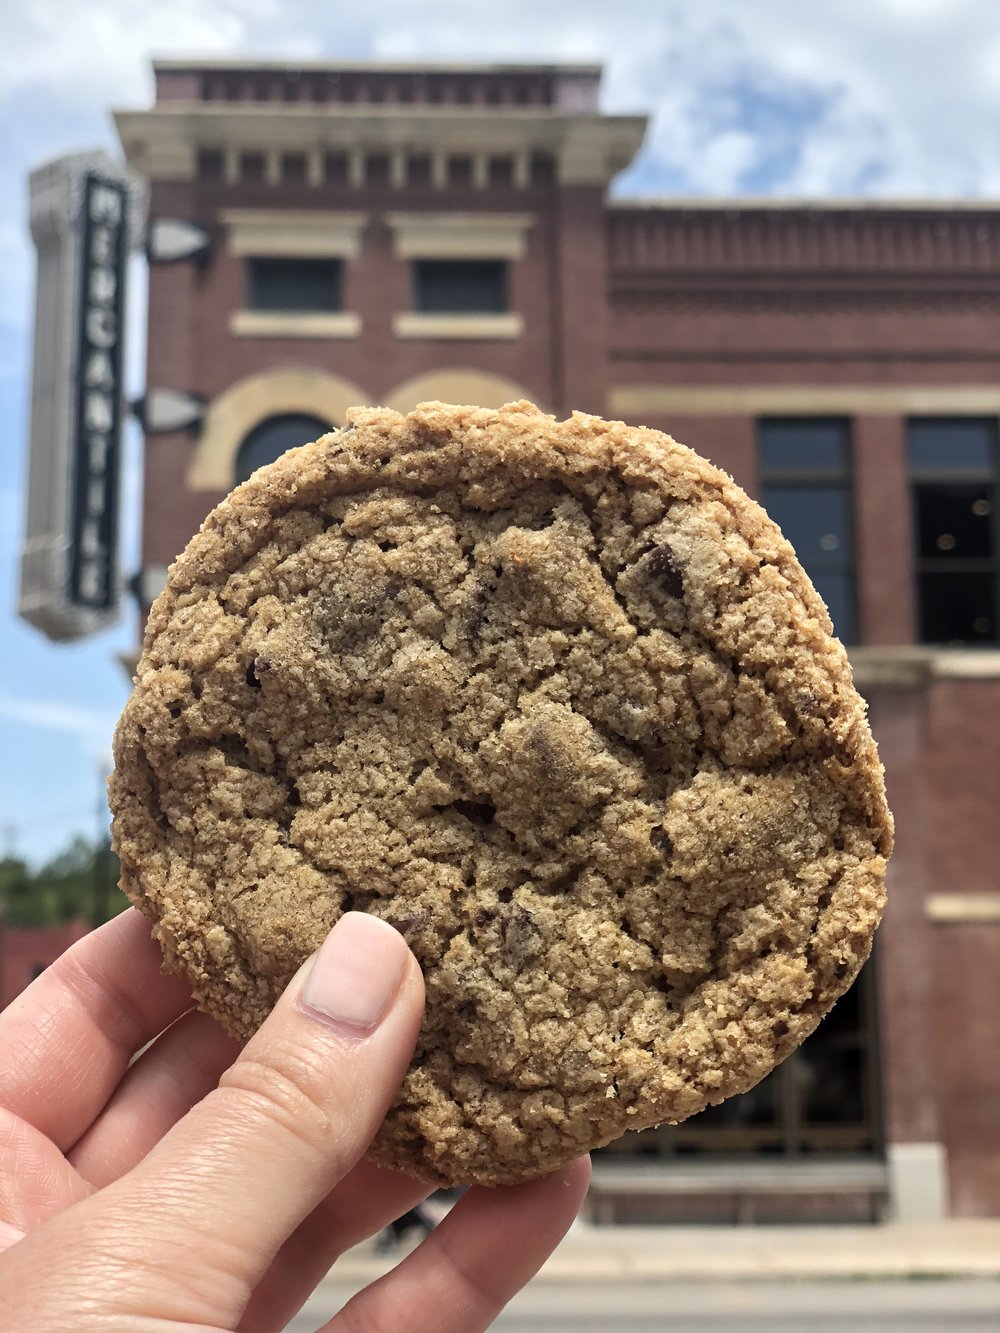 The Pioneer Woman Experience Cookie Tour